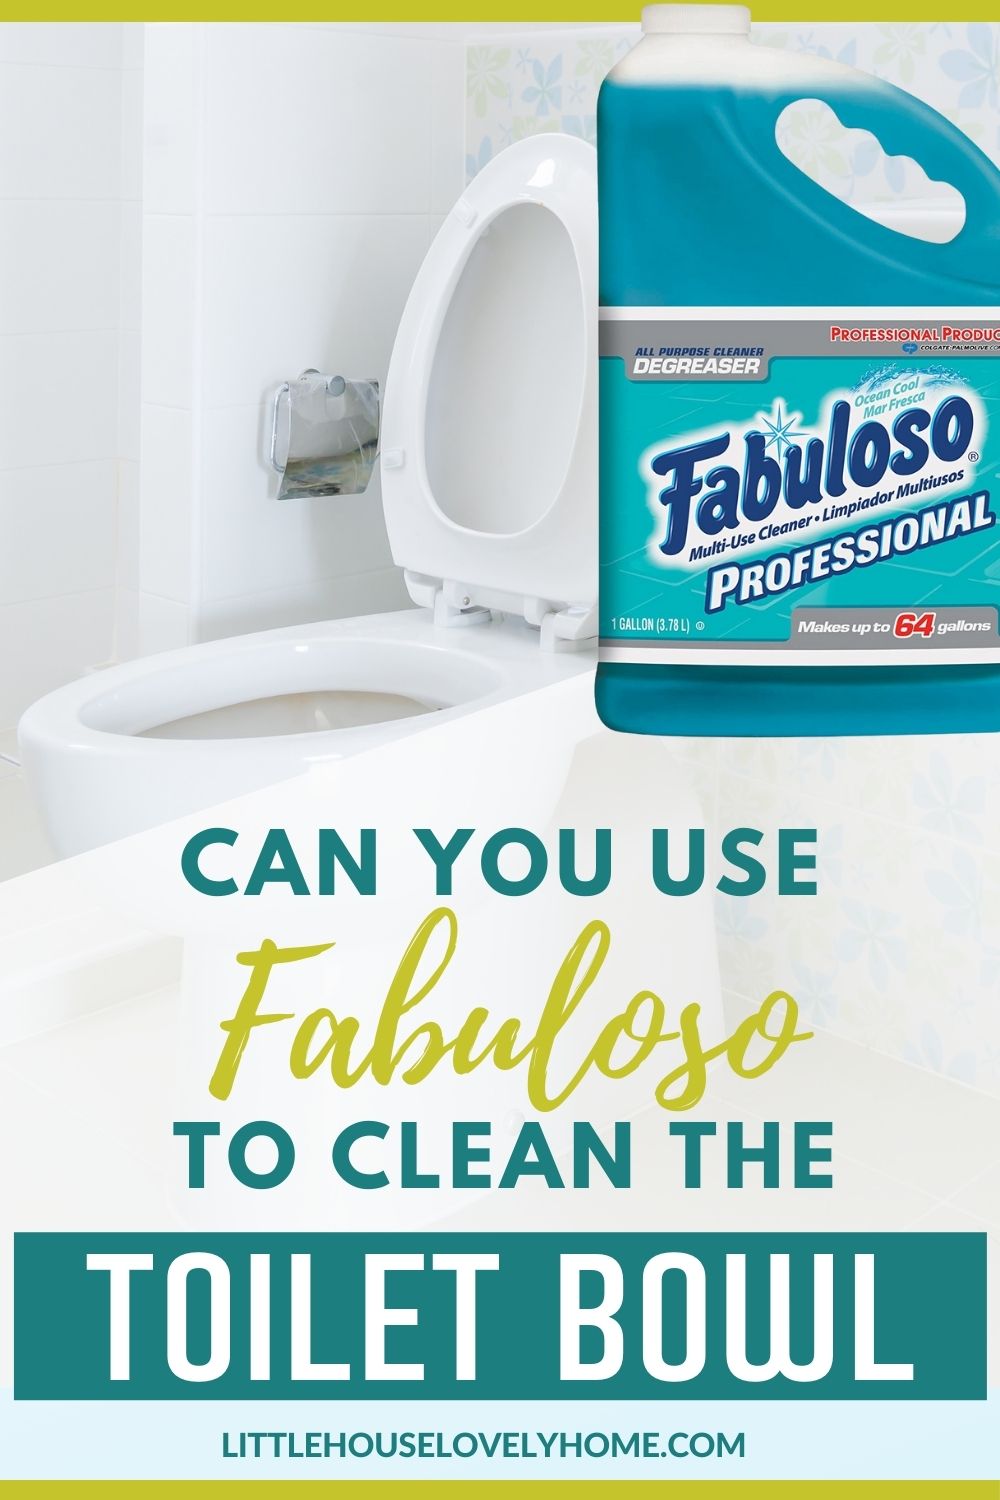 Photo showing the image of a toilet bowl, a gallon of fabuloso and text overlay that read Can you use Fabuloso to clean the toilet bowl